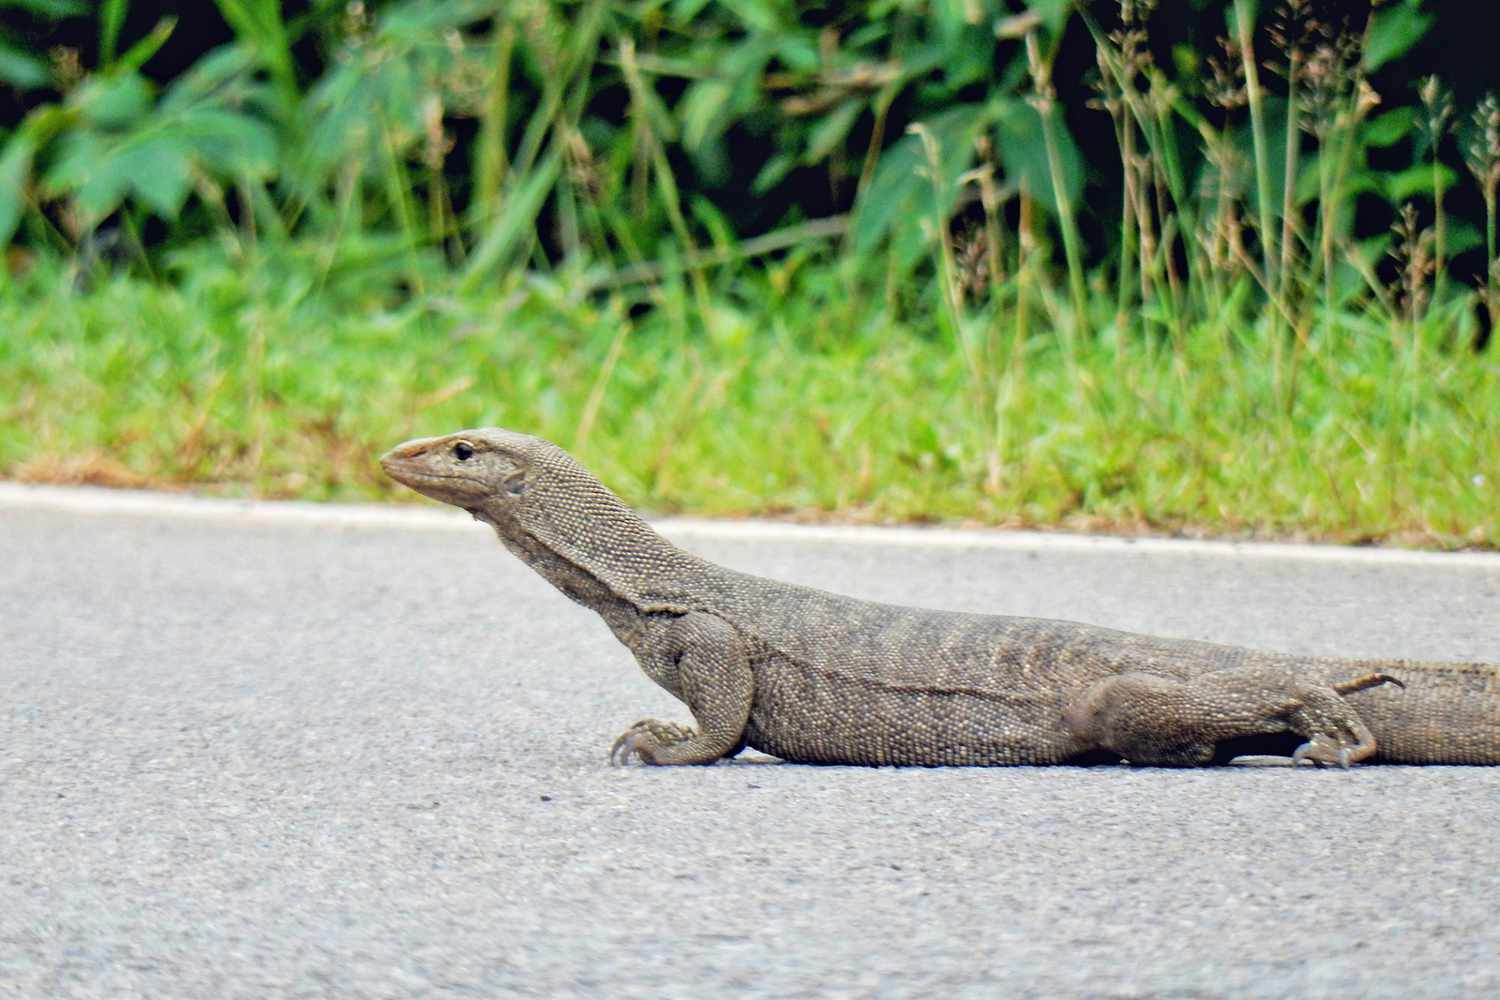 montior lizard on the road